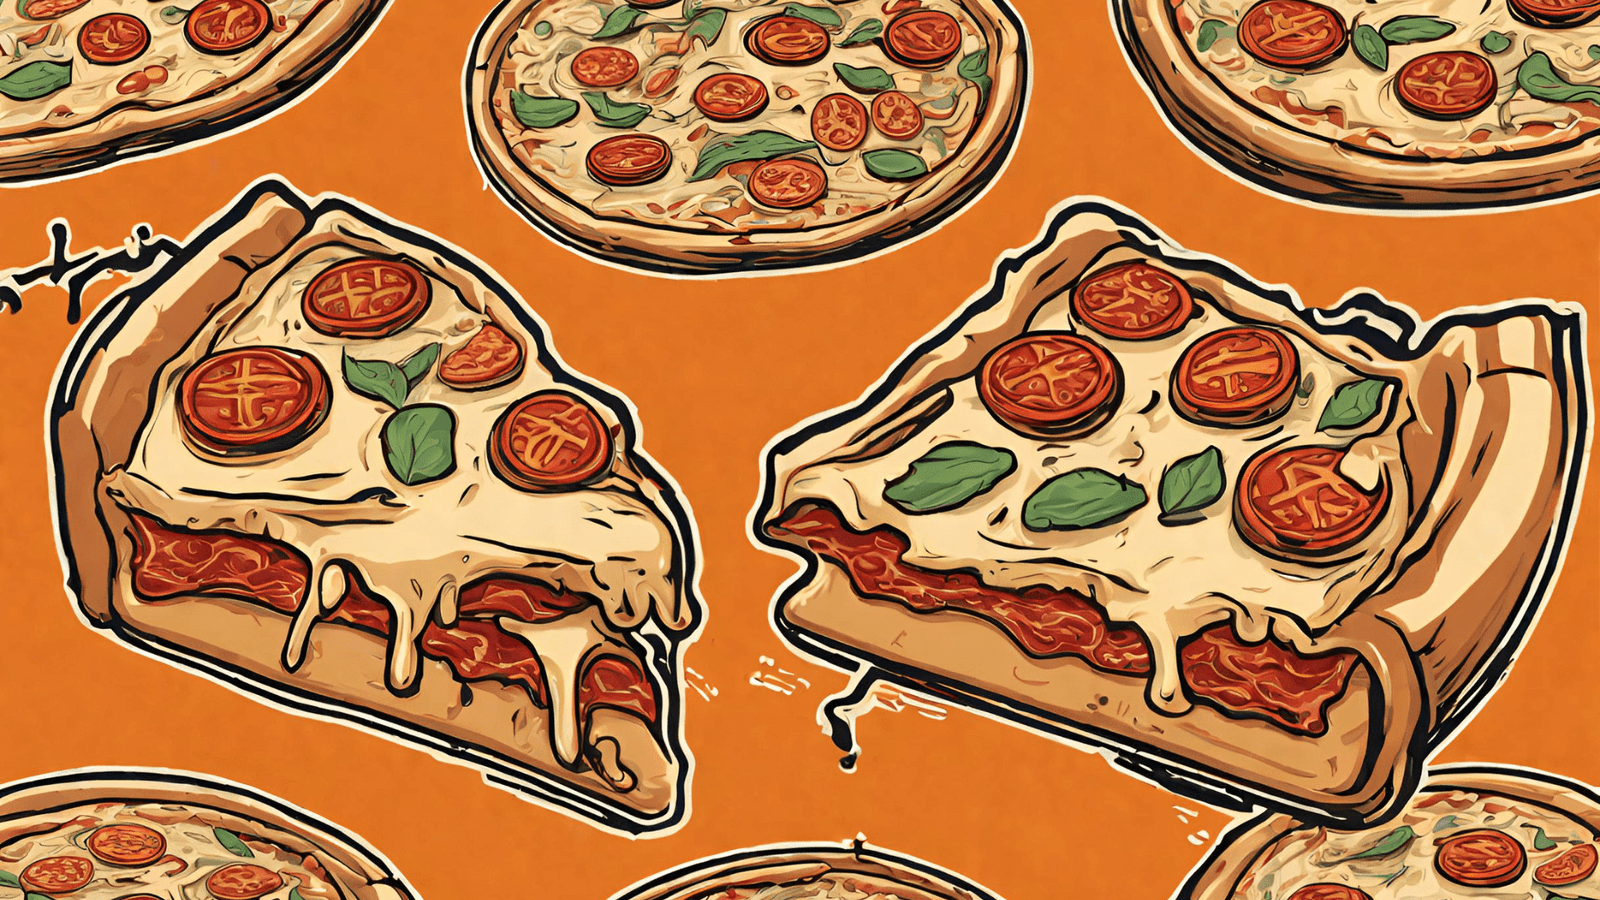 Pizza as a Symbol of the Bitcoin Revolution